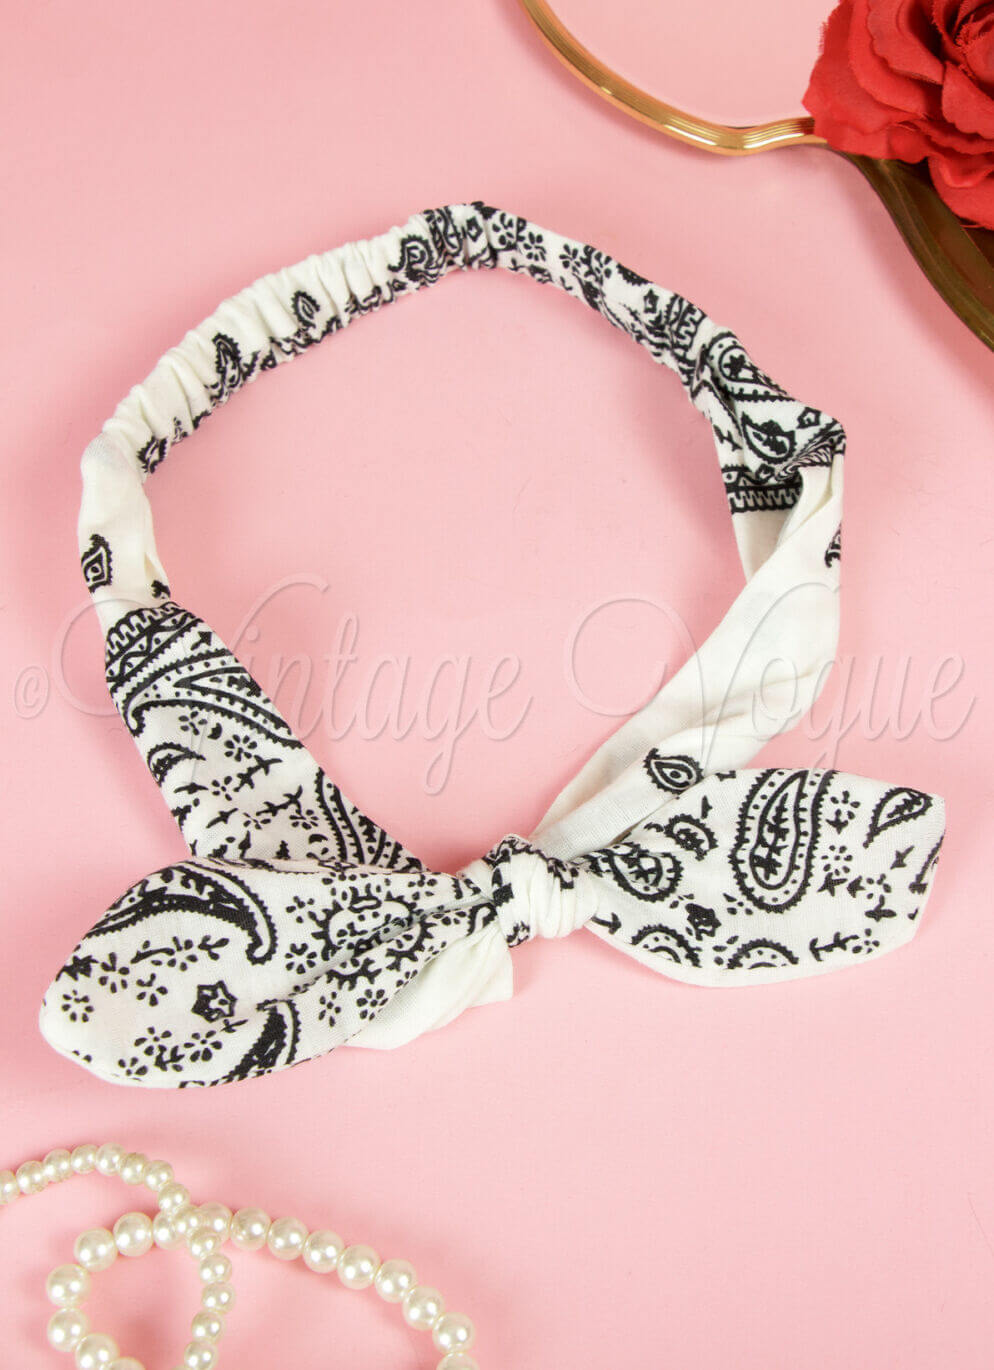 Forever Fifties 50er Jahre Rockabilly Retro Bandana Haarband Paisley in Weiß